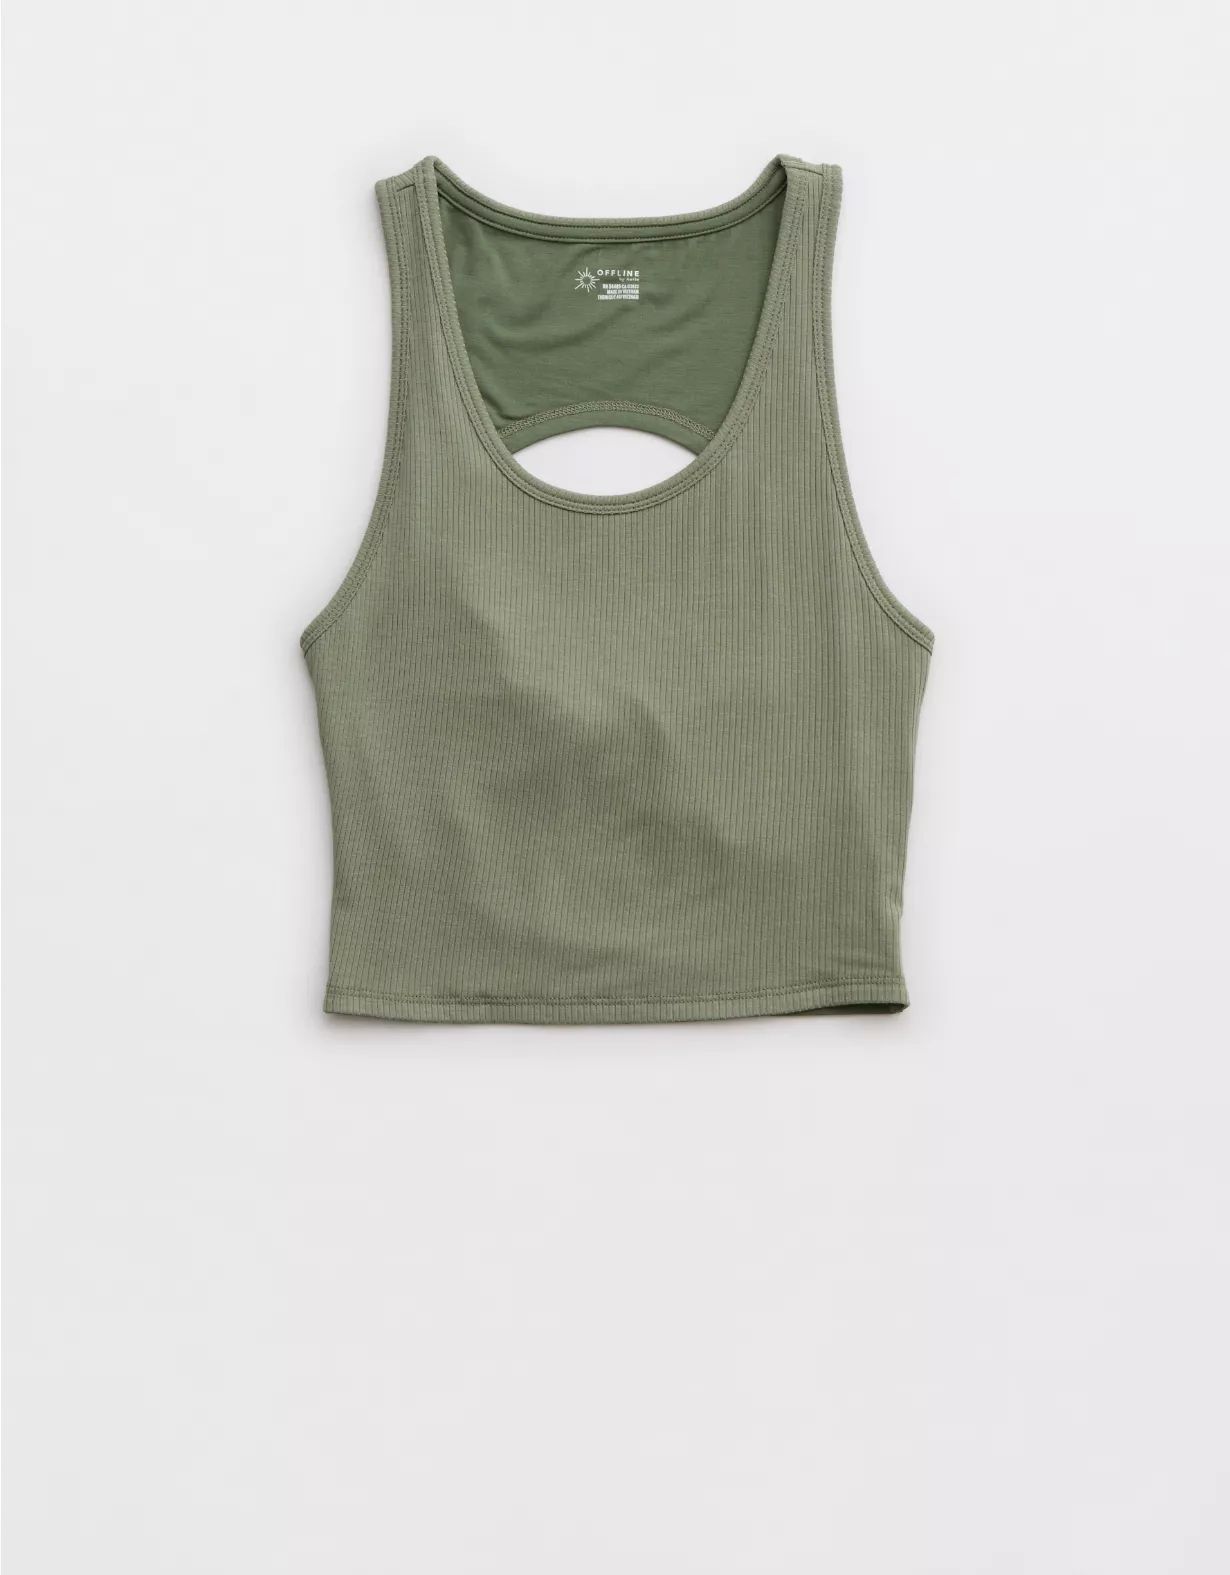 OFFLINE By Aerie Thumbs Up Twist Back Tank Top | Aerie